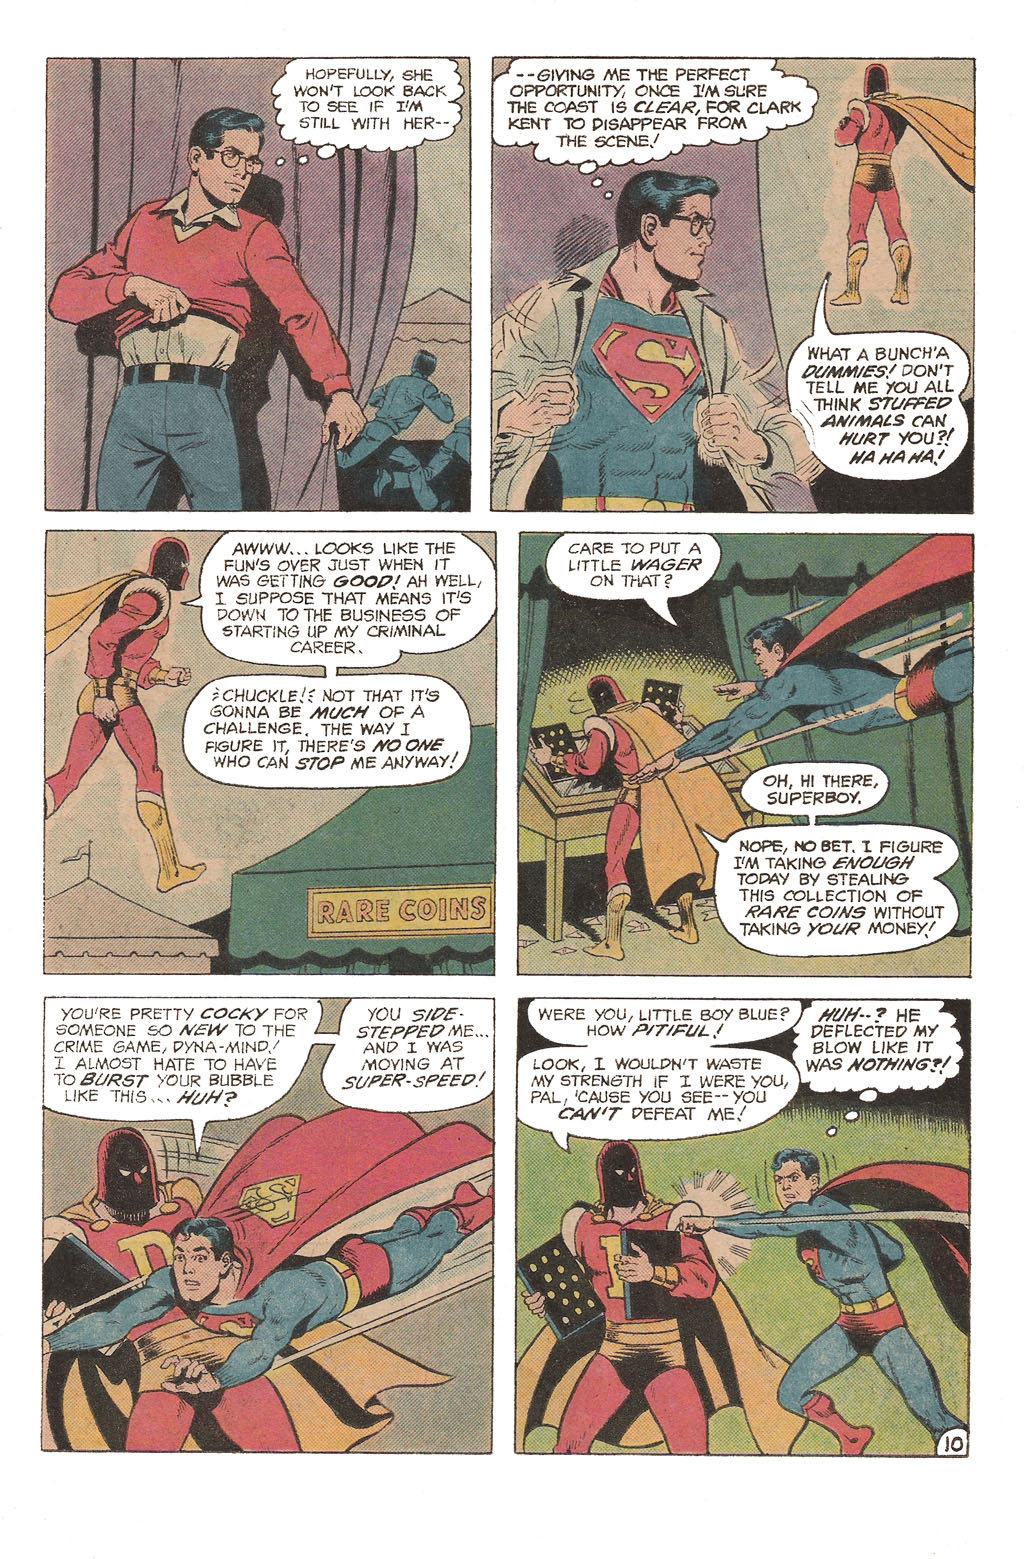 The New Adventures of Superboy 42 Page 10